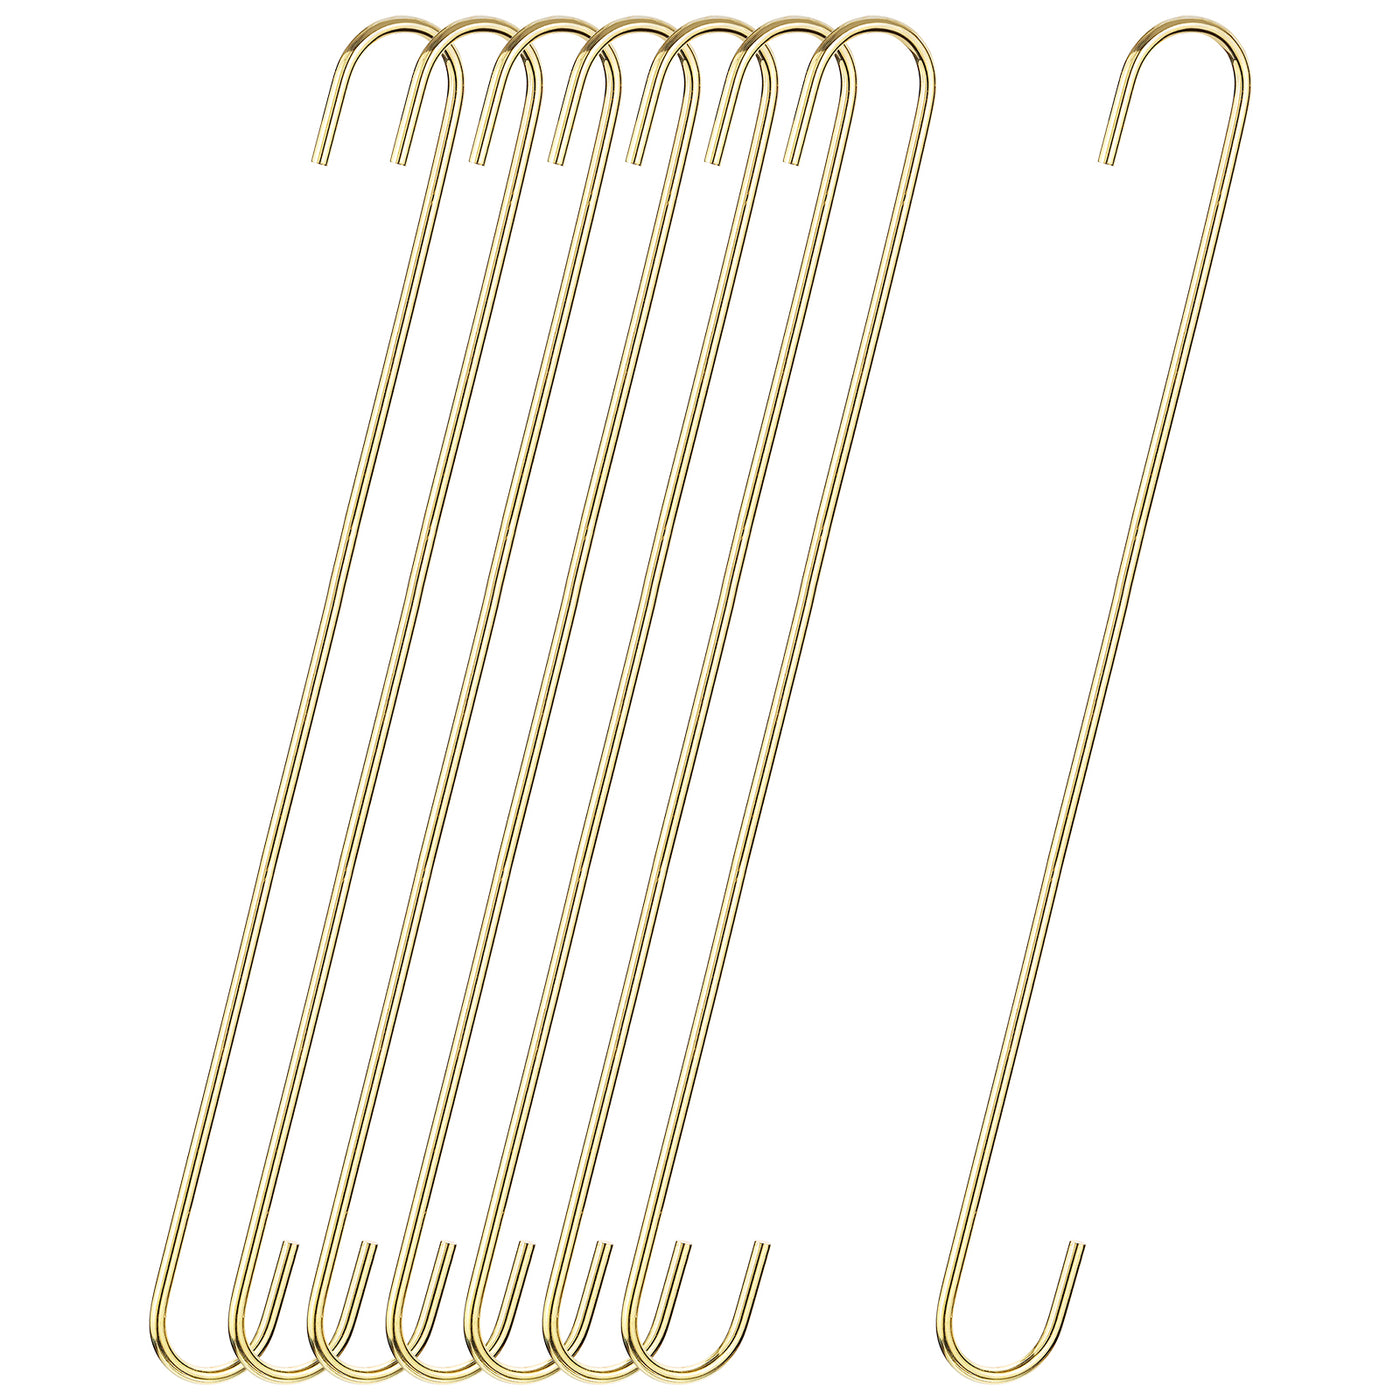 uxcell Uxcell S Hanging Hooks, 16inch(400mm) Extra Long Steel Hanger, Indoor Outdoor Uses for Garden, Bathroom, Closet, Workshop, Kitchen, Gold Tone, 8Pcs